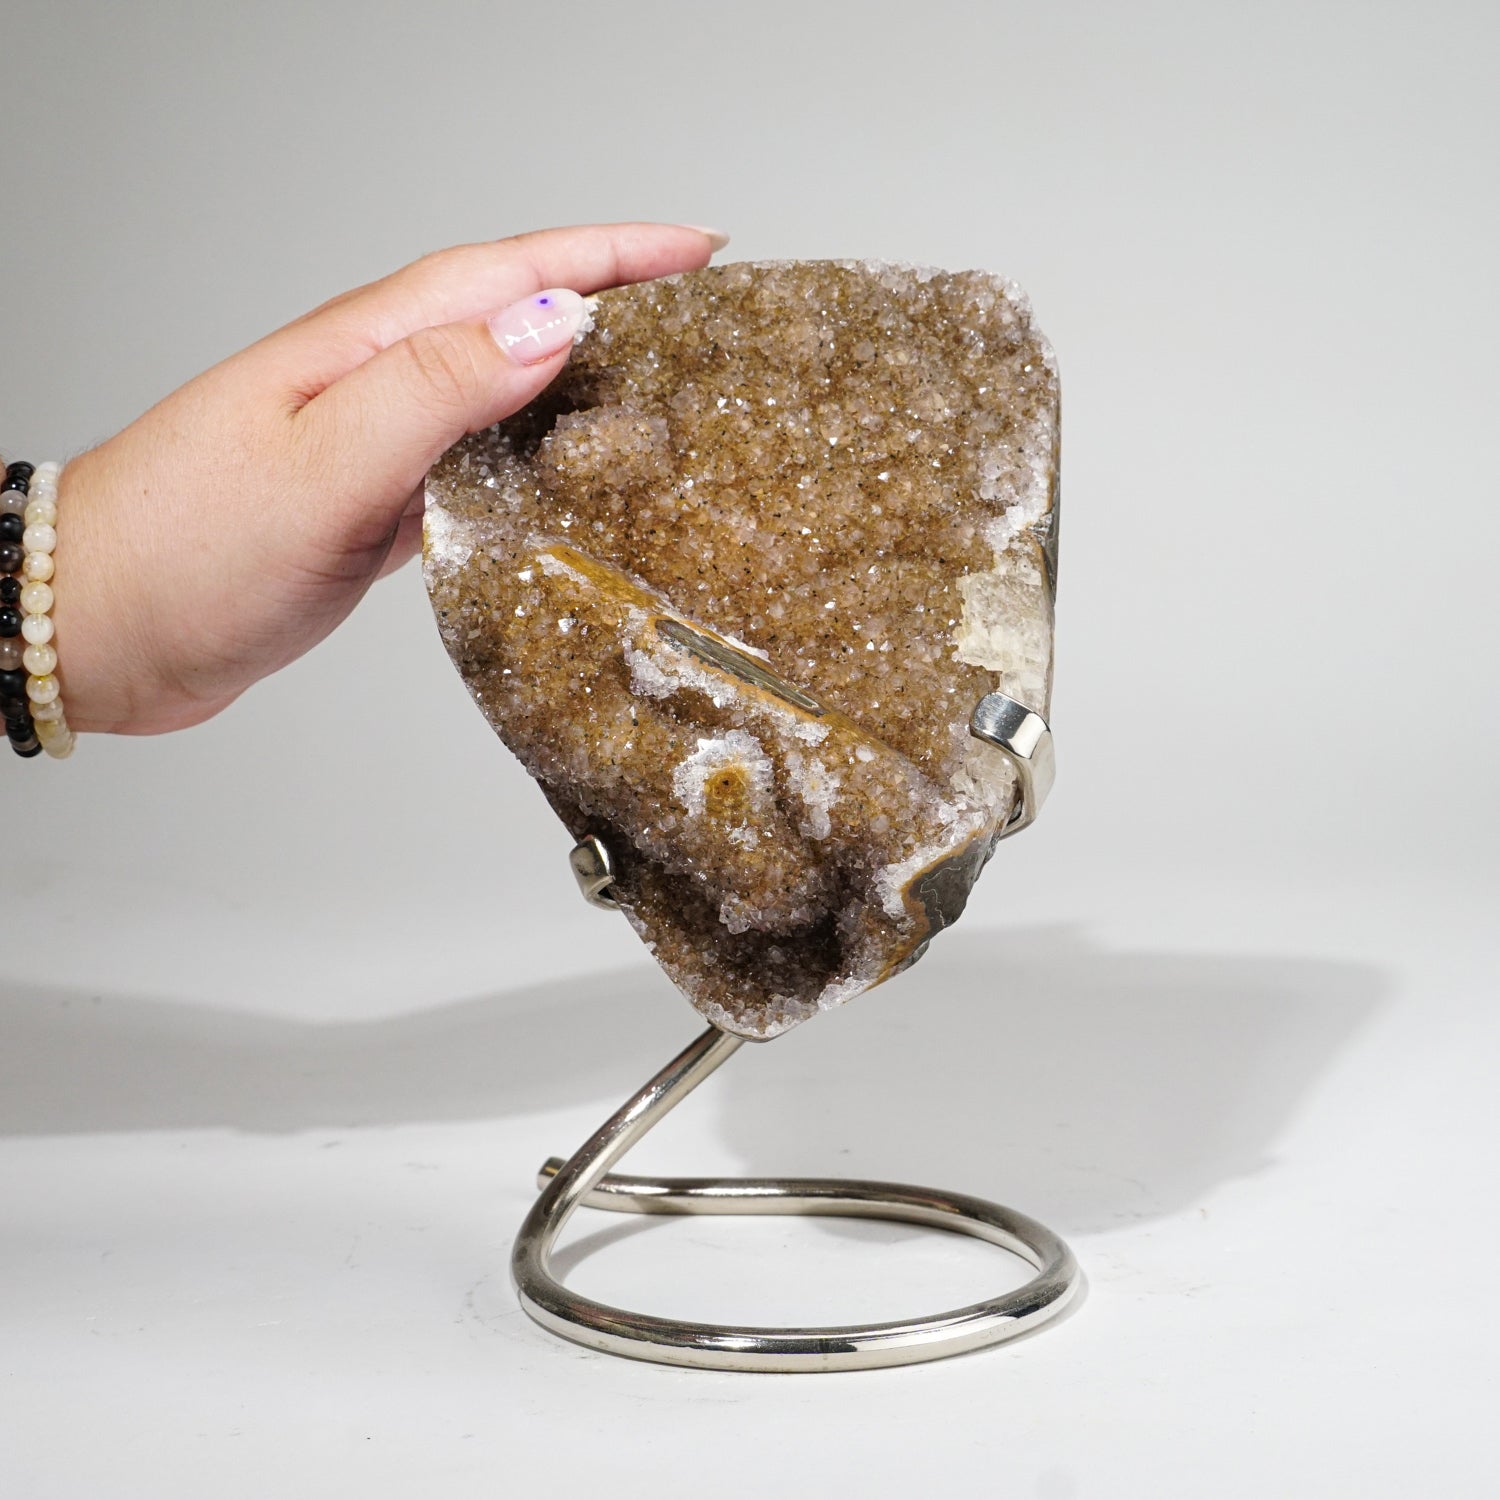 Druzy Crystal Cluster Geode on Metal Stand from Uruguay (4.5 lbs)